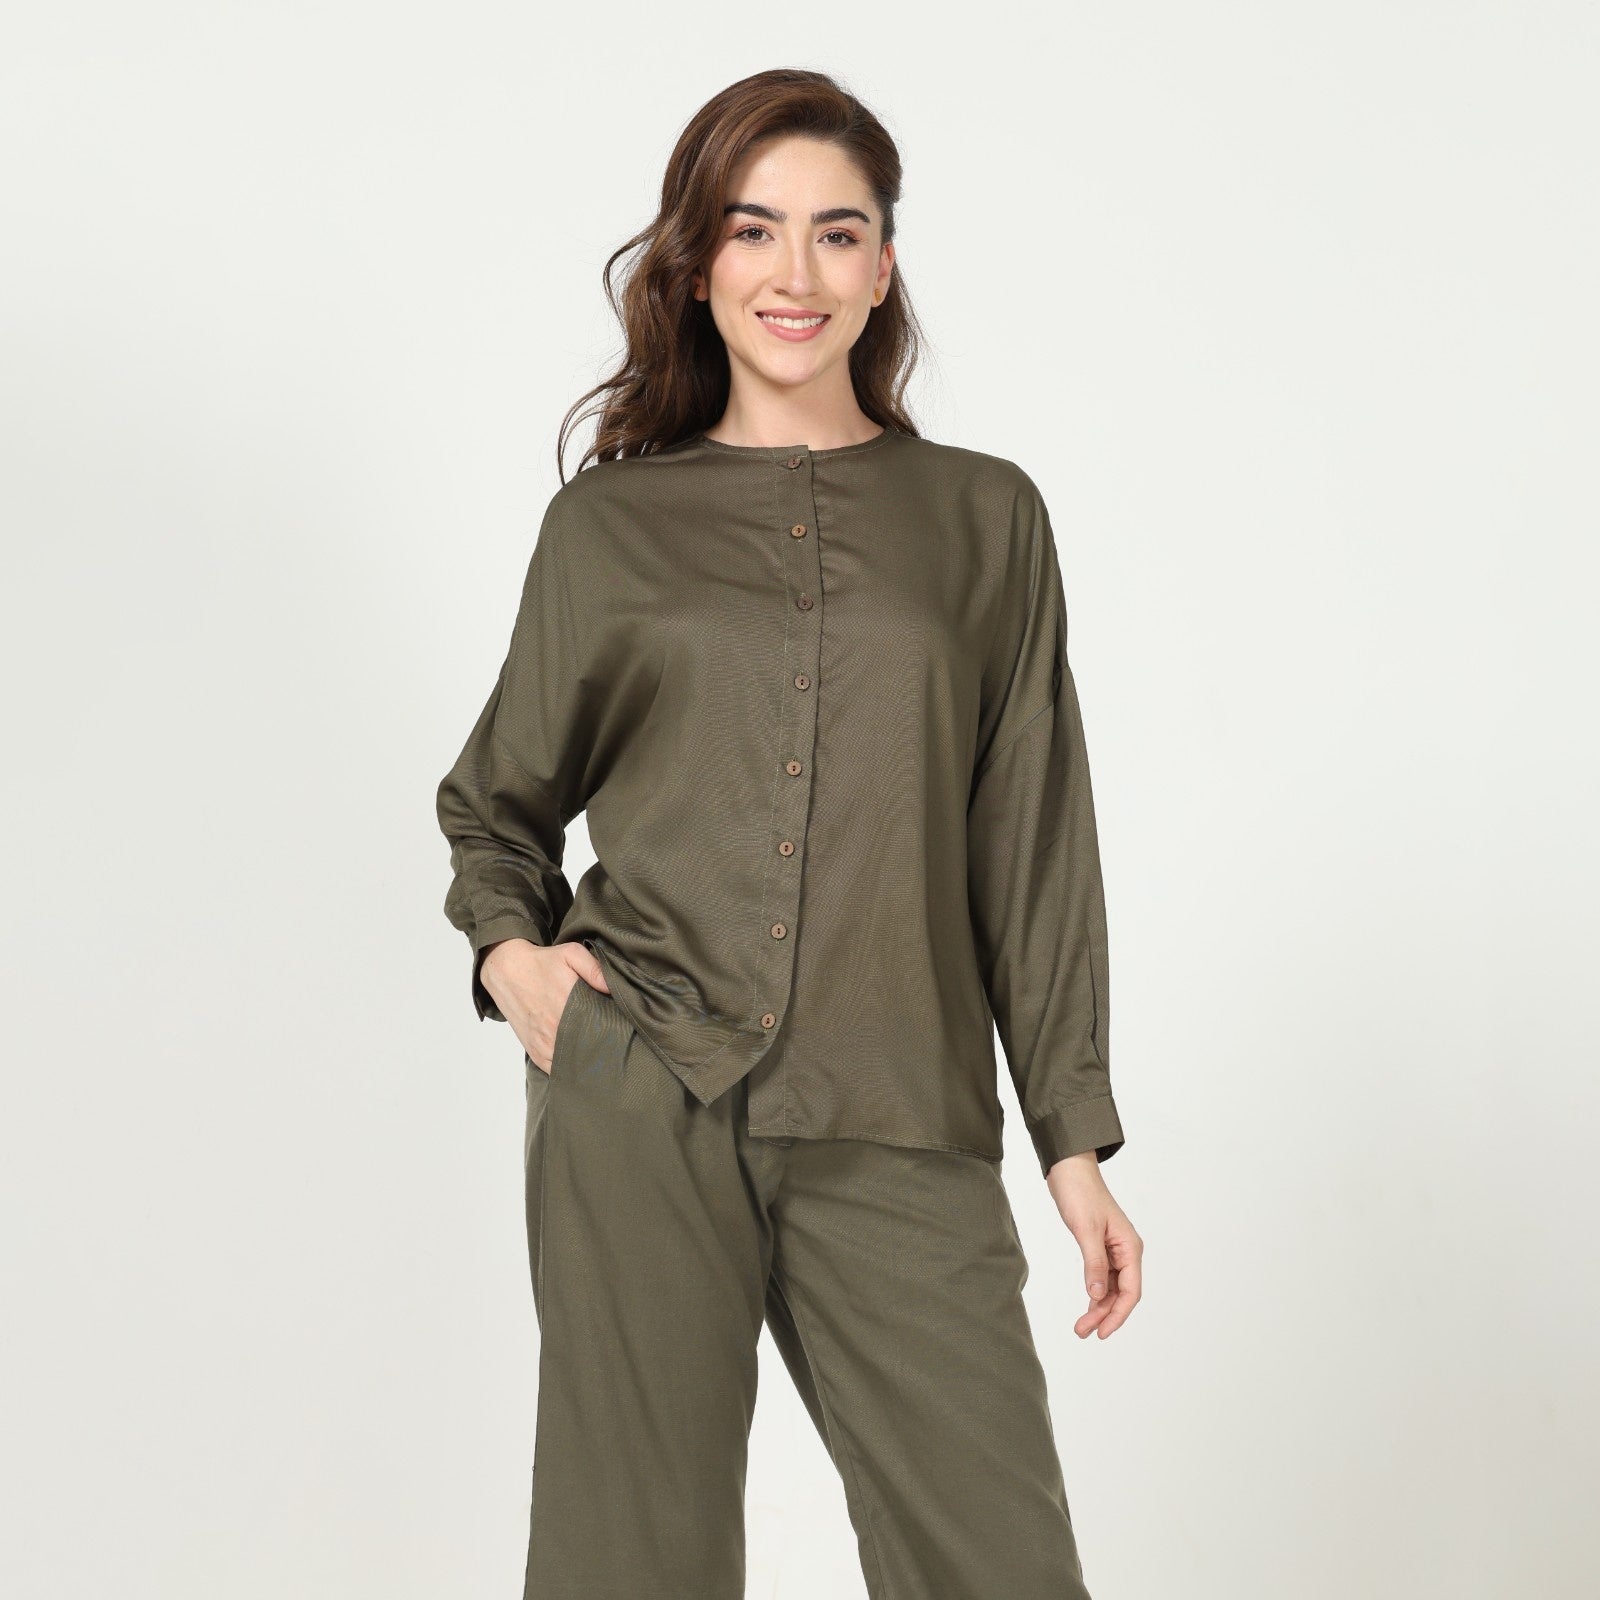 Uncollared Shirt - Olive Green